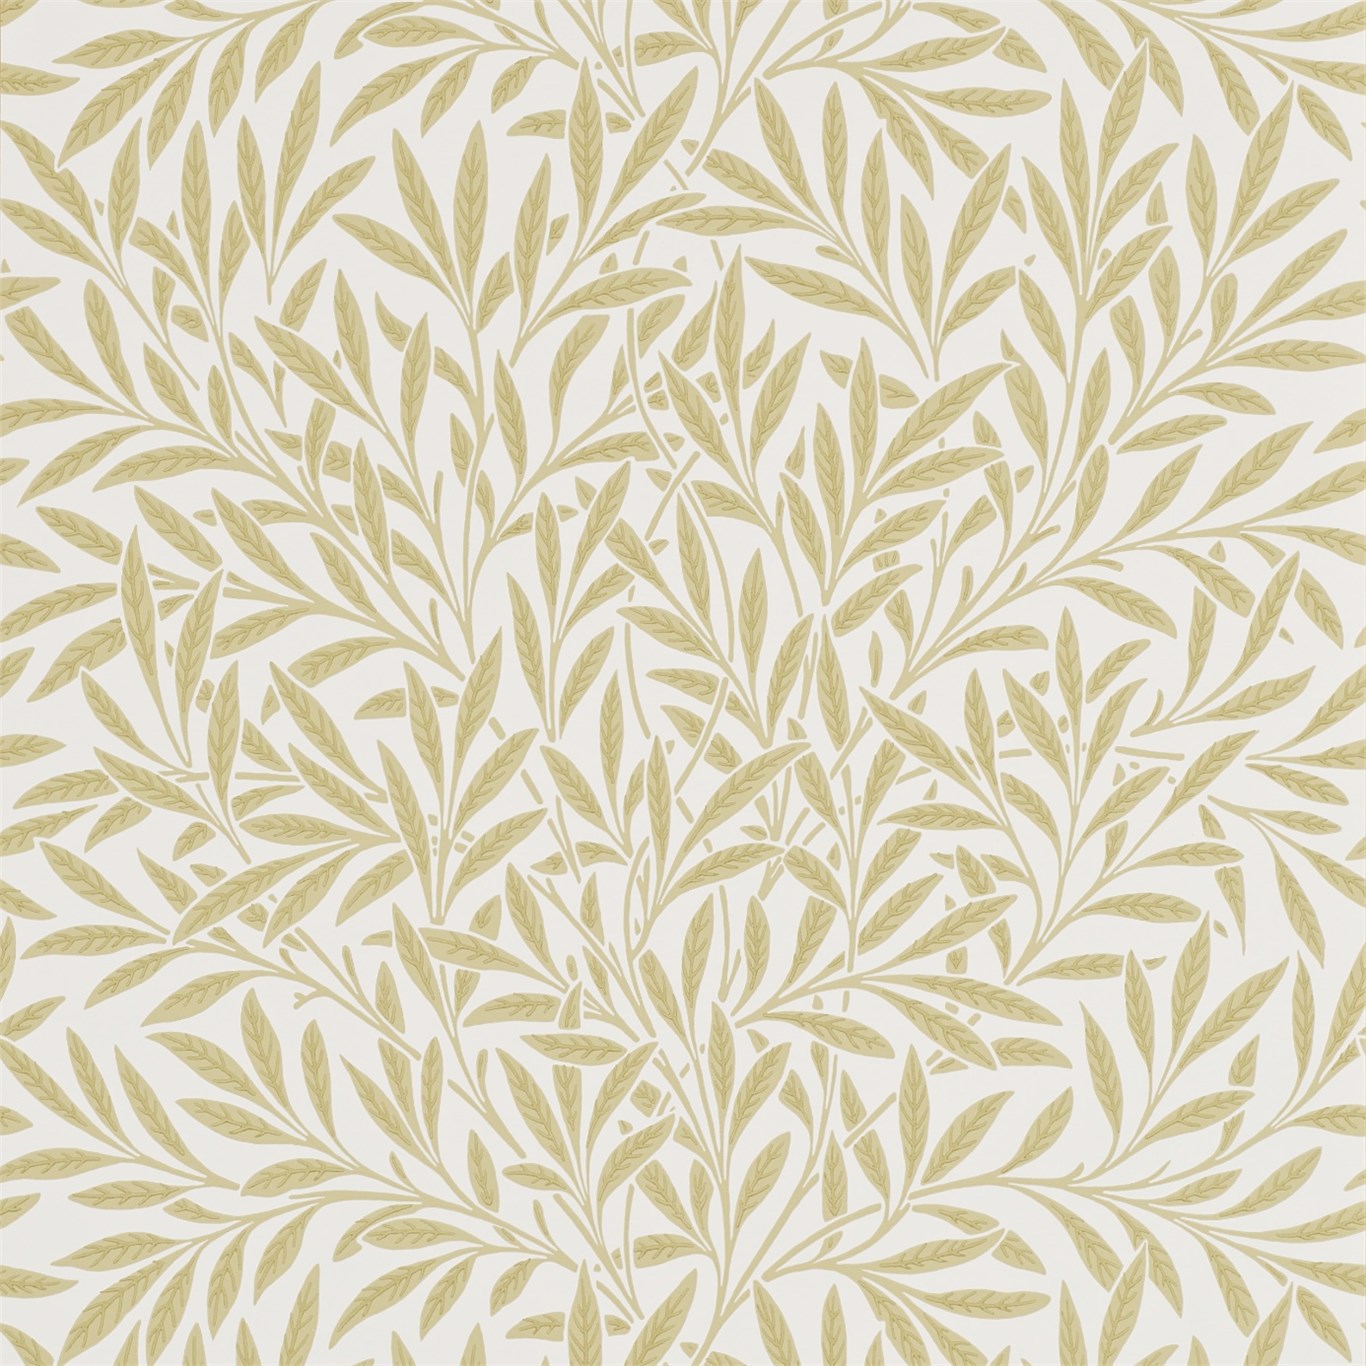 Willow Camomile Wallpaper DM6P210384 by Morris & Co